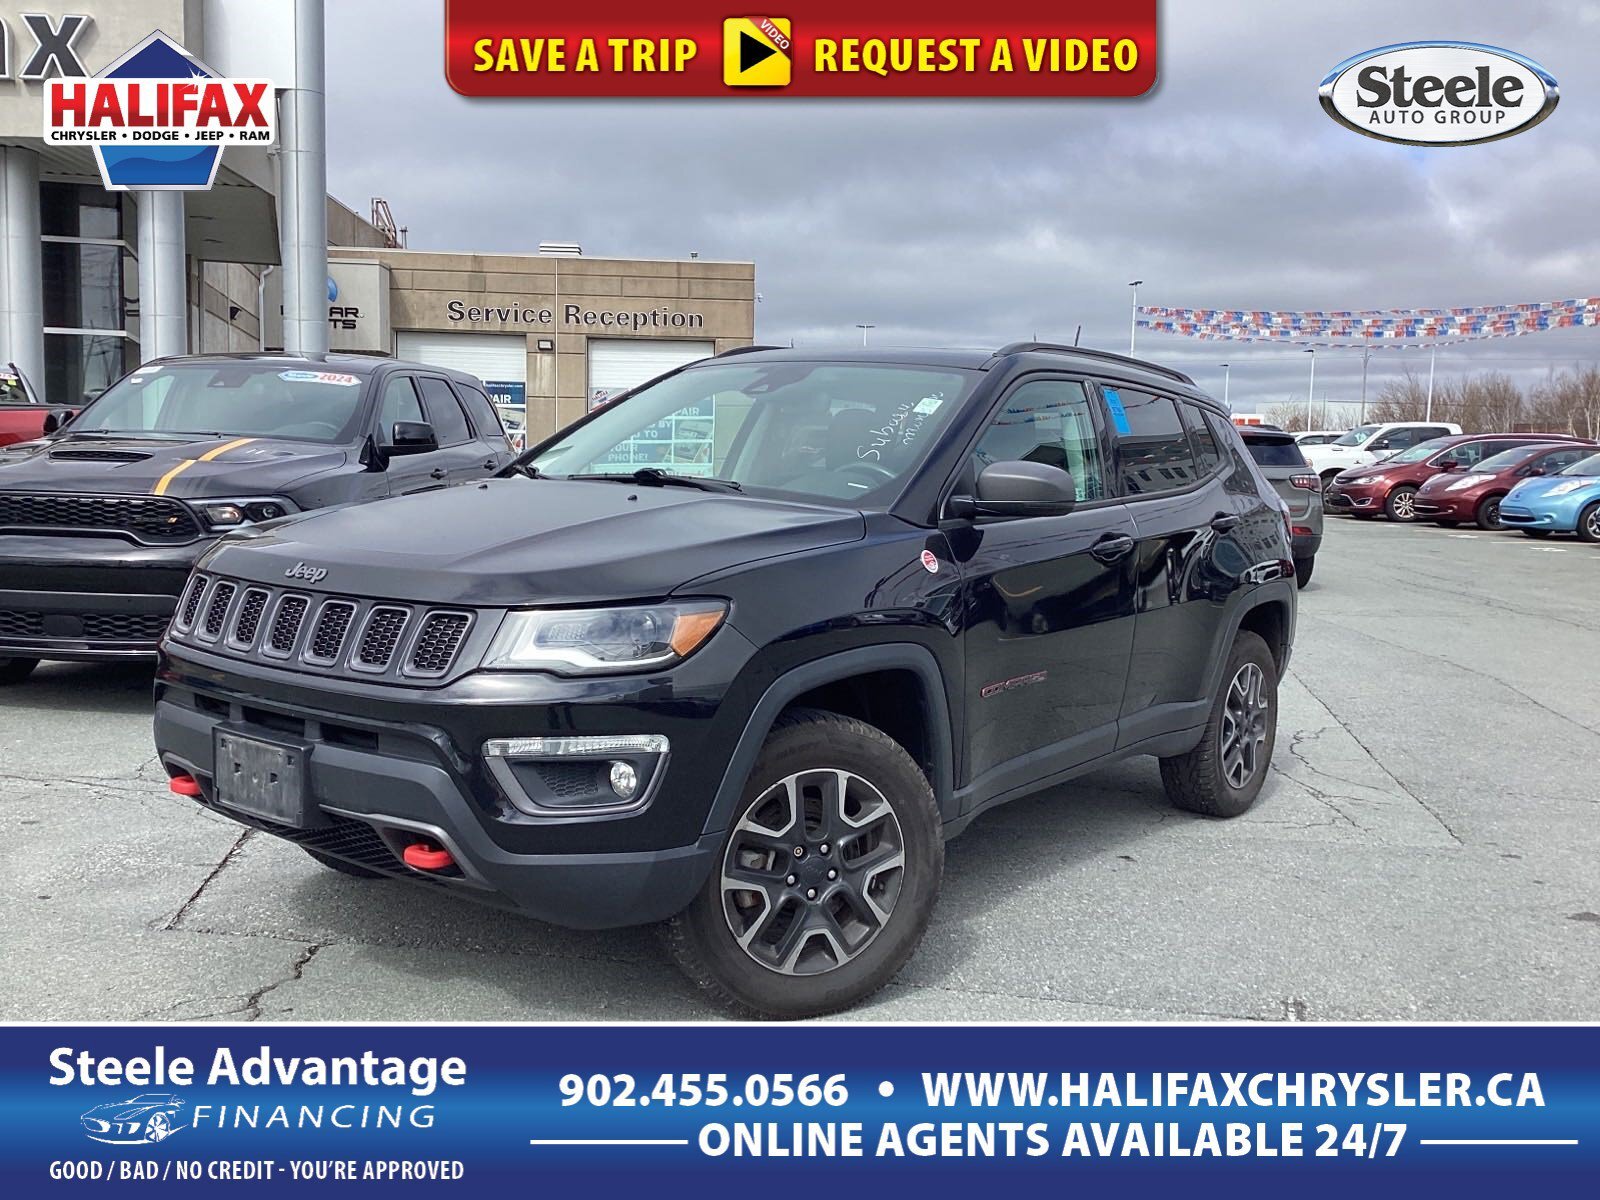 2018 Jeep Compass Trailhawk - NAV, PANO ROOF, HEATED LEATHER SEATS A